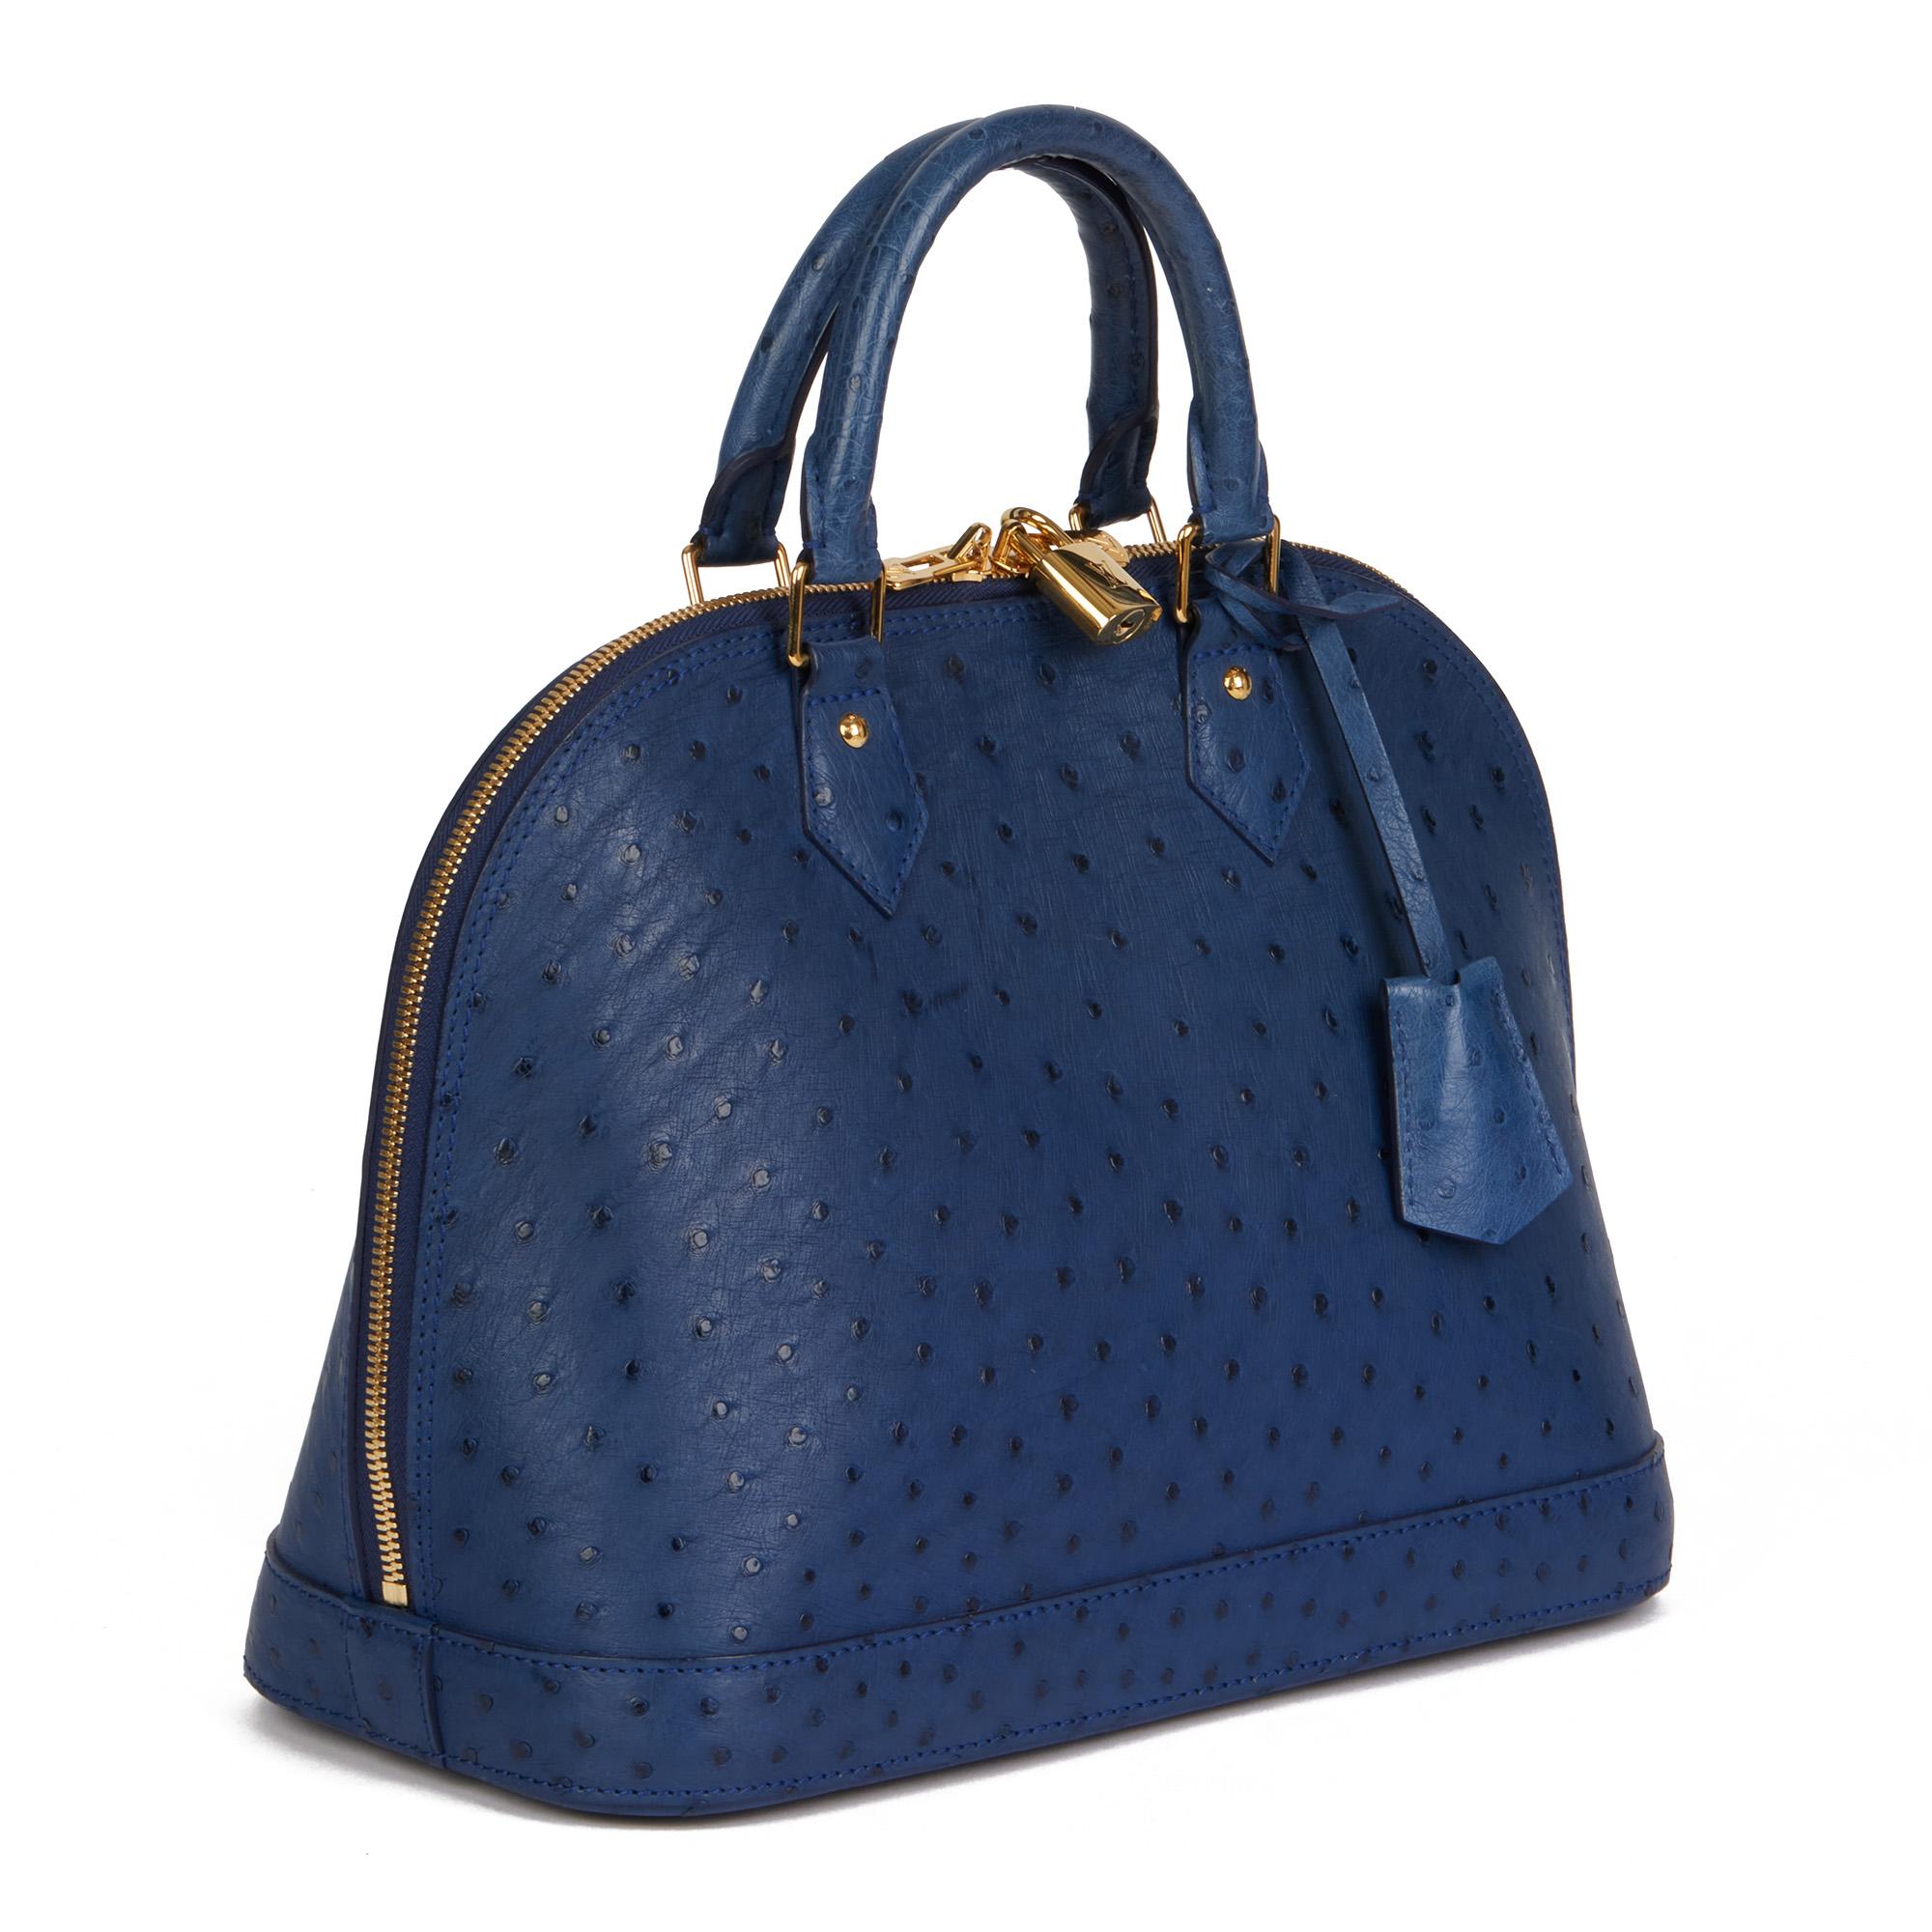 Louis Vuitton NAVY OSTRICH LEATHER ALMA MM

CONDITION NOTES
The exterior is in excellent condition with light signs of use.
The interior is in excellent condition with light signs of use.
The hardware is in excellent condition with light signs of